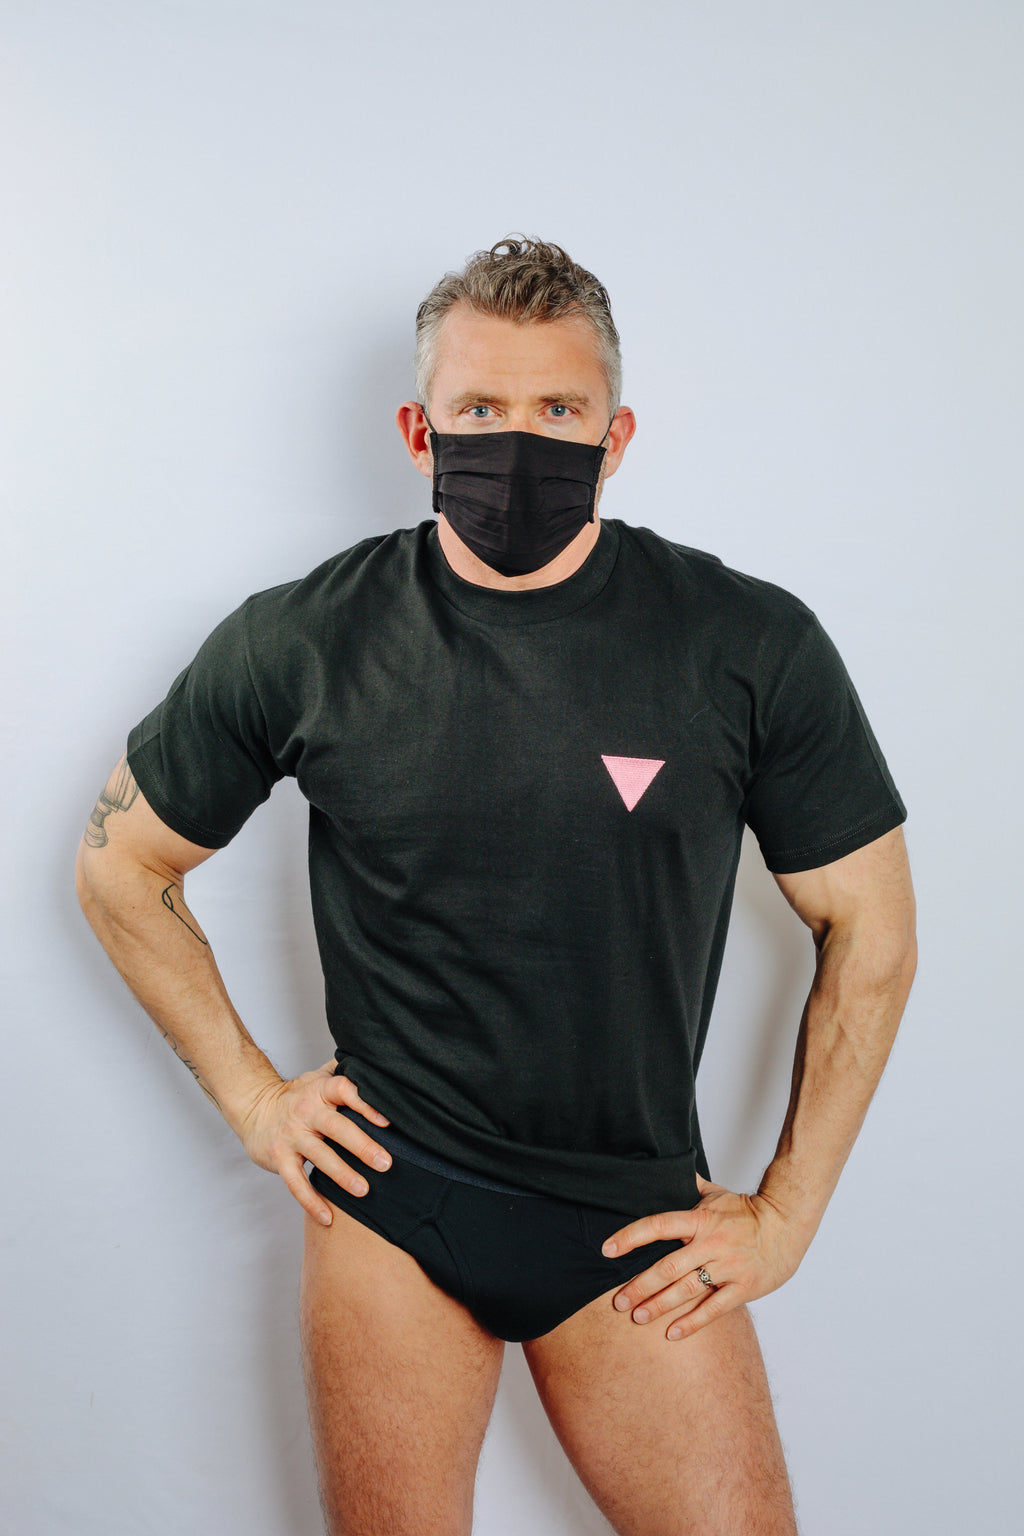 Pink Triangle T-Shirt (Available in Black or White)